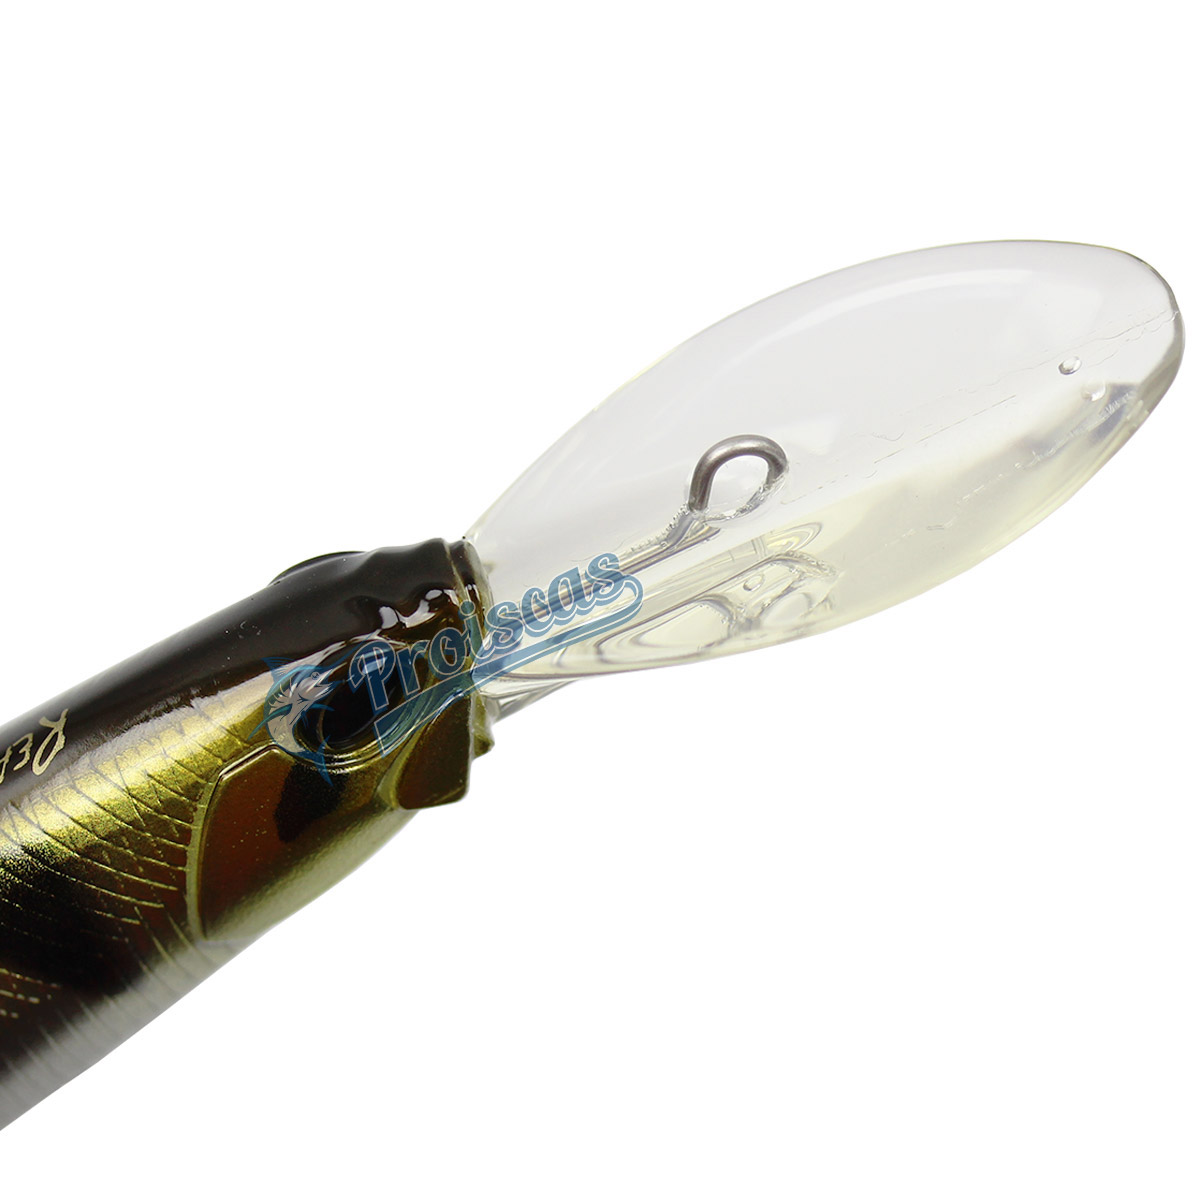 Isca Artificial Duo Realis Fangbait 120DR 12cm 26.7g